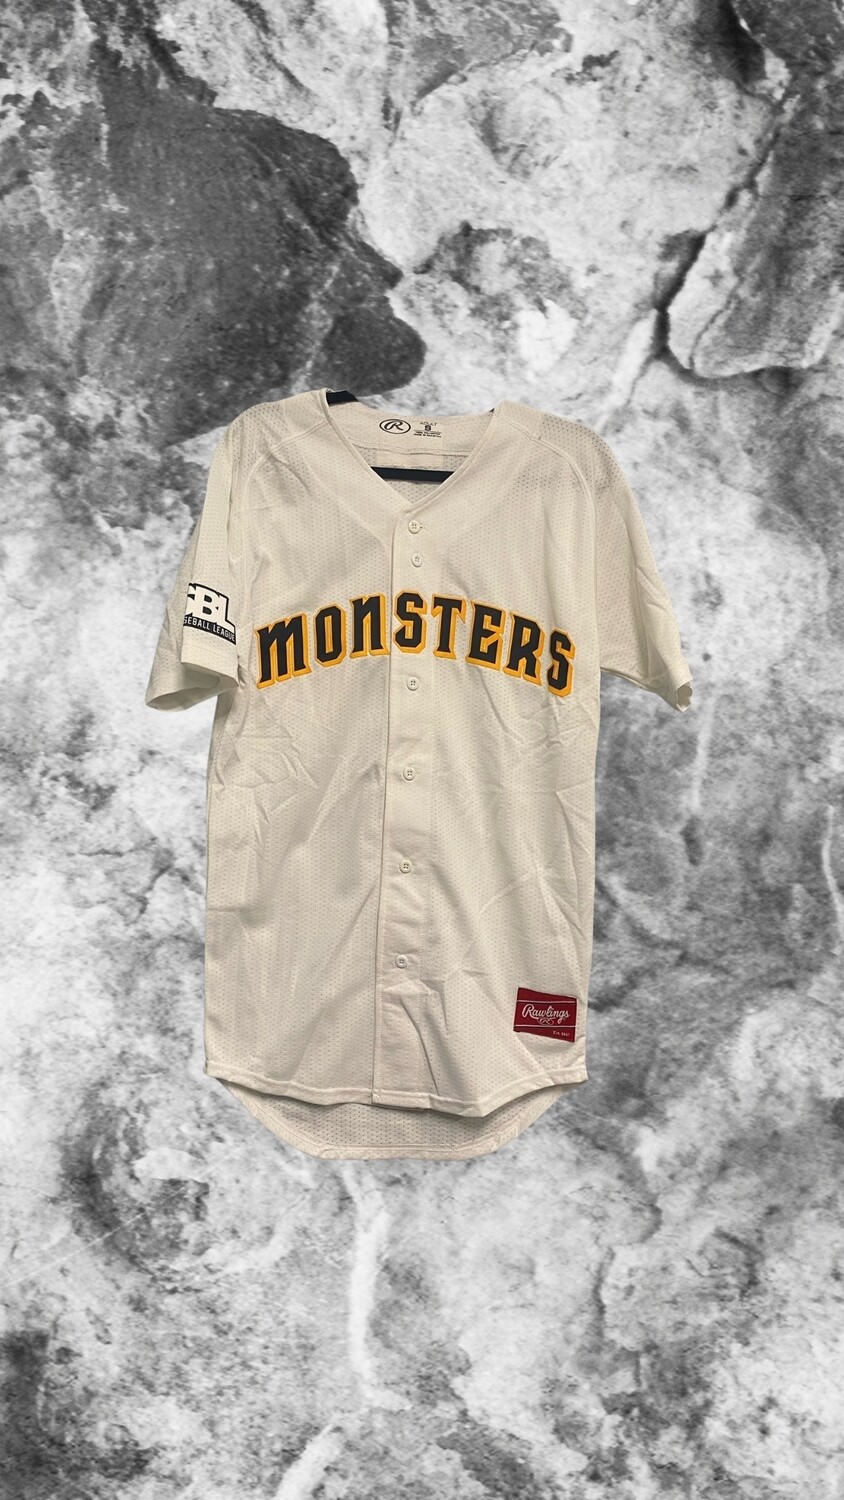 Monsters White Jersey Blank